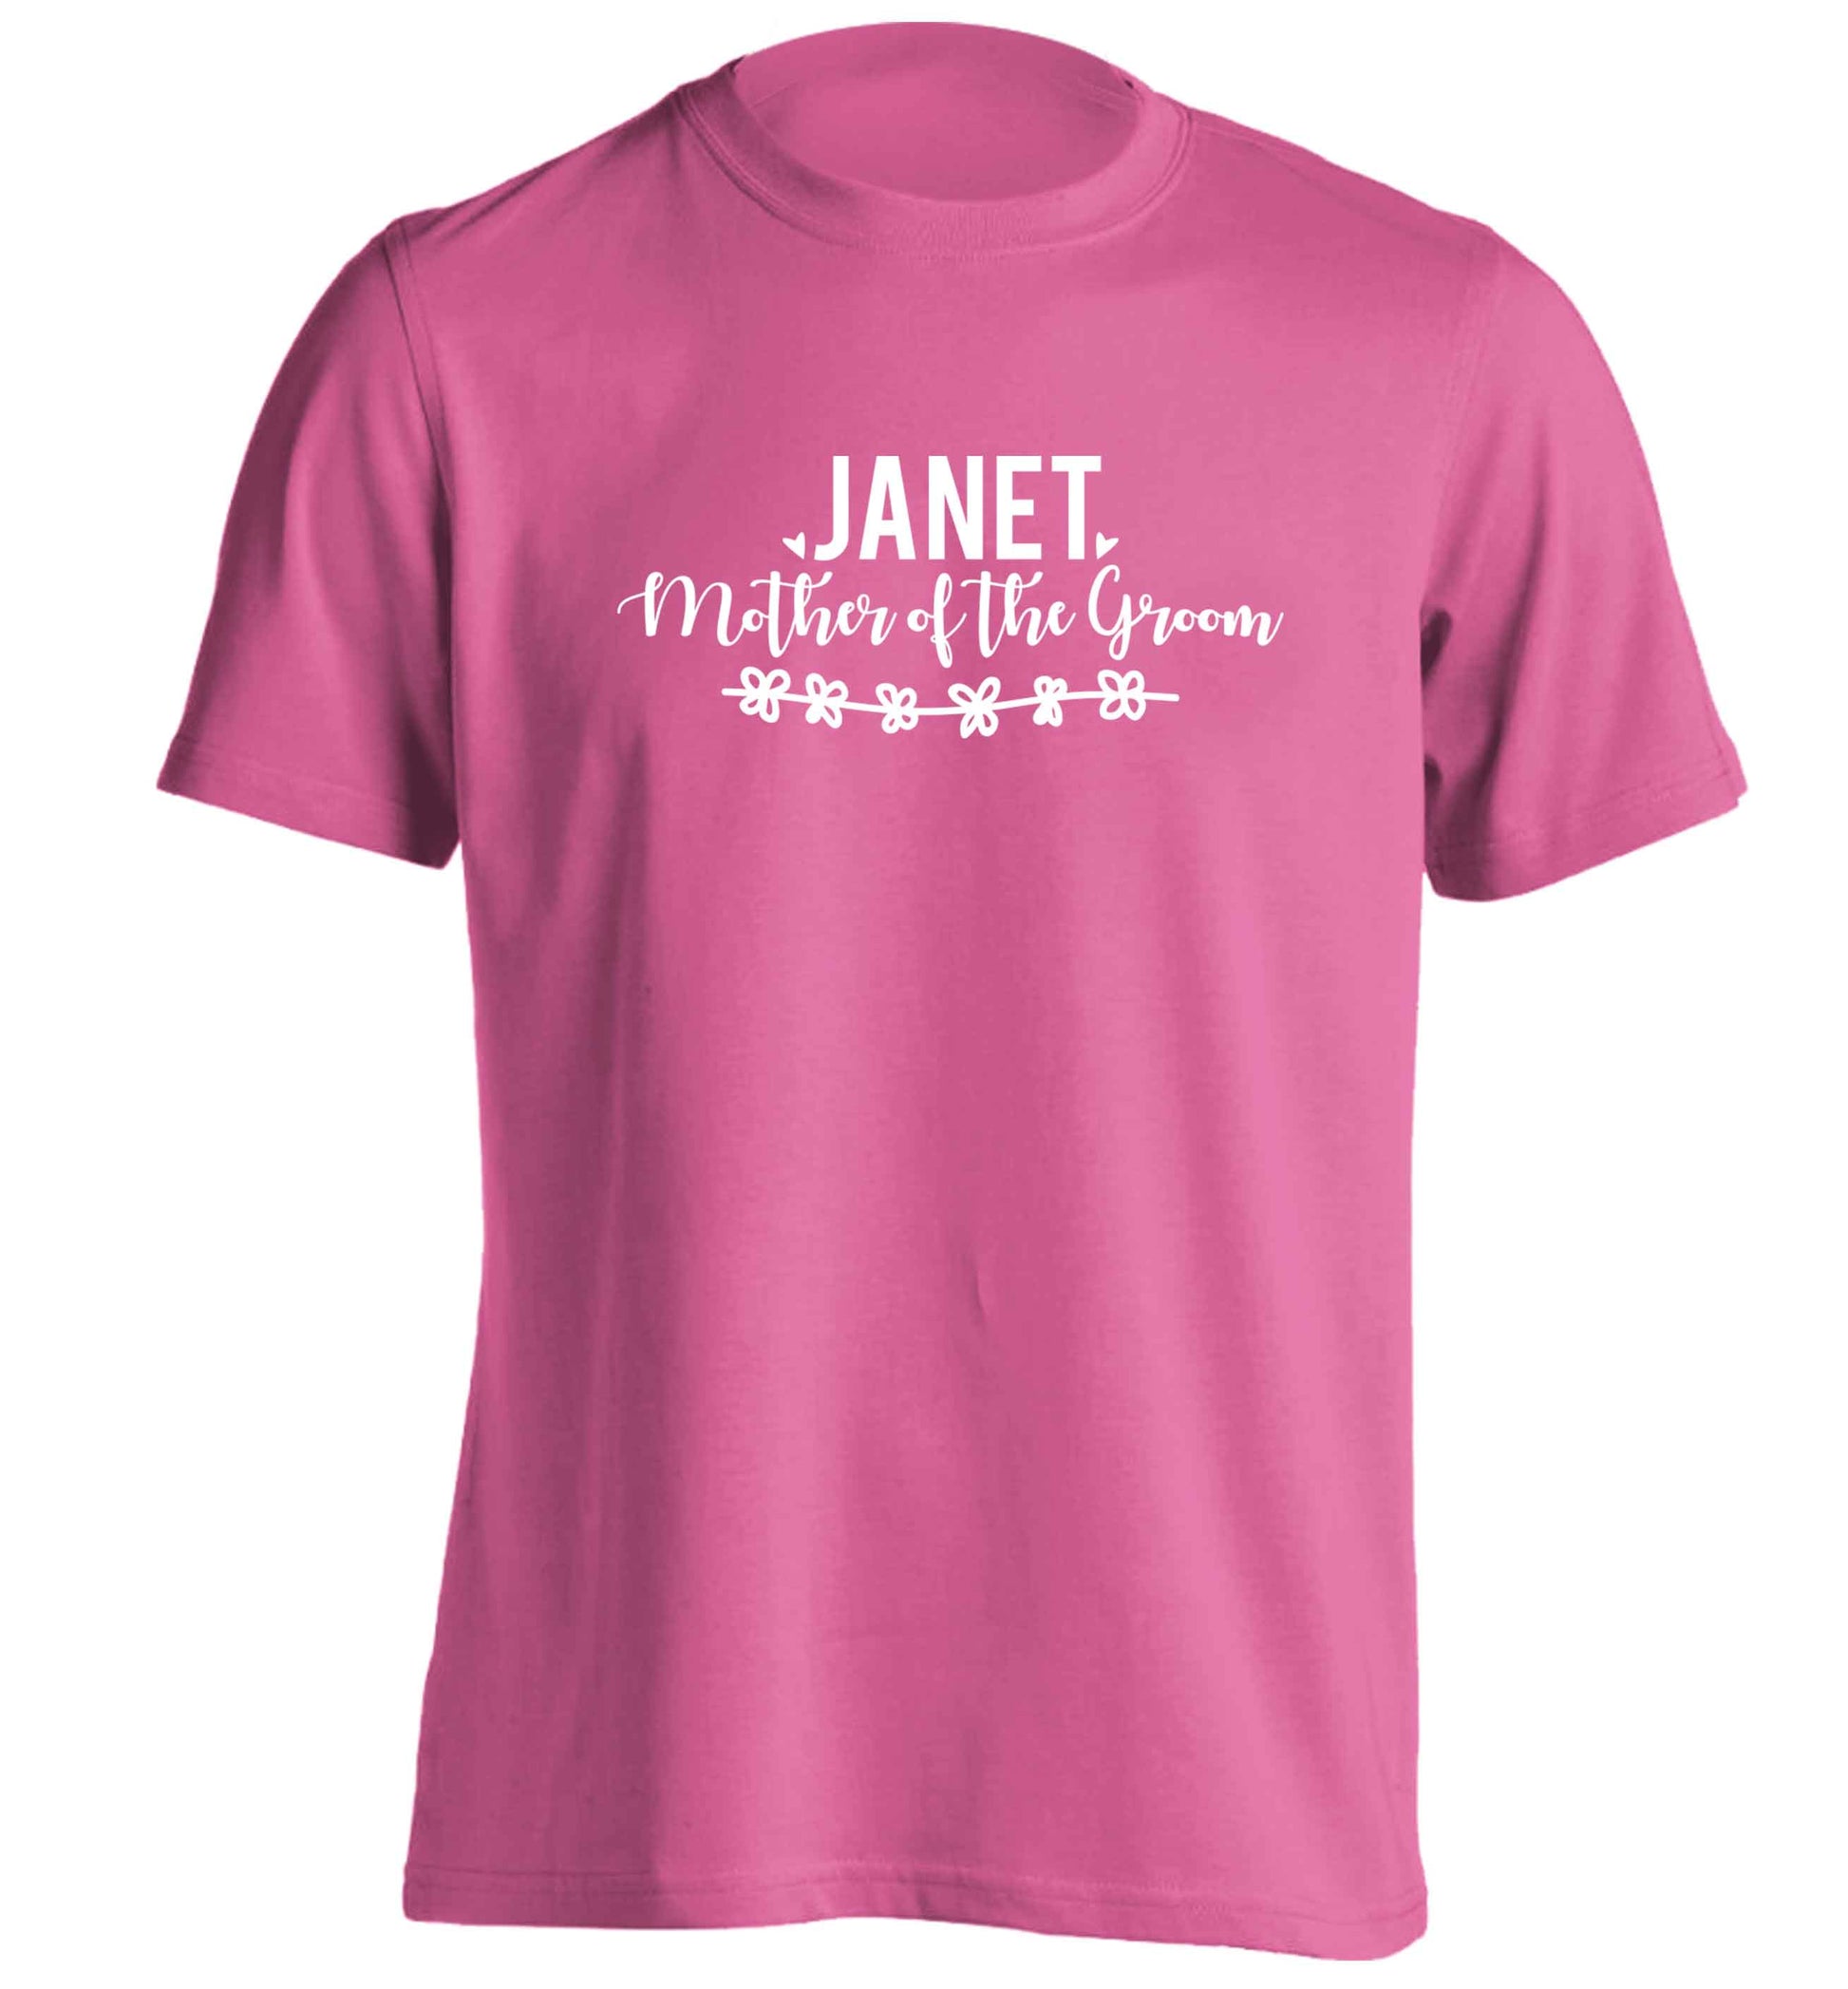 Personalised mother of the groom adults unisex pink Tshirt 2XL